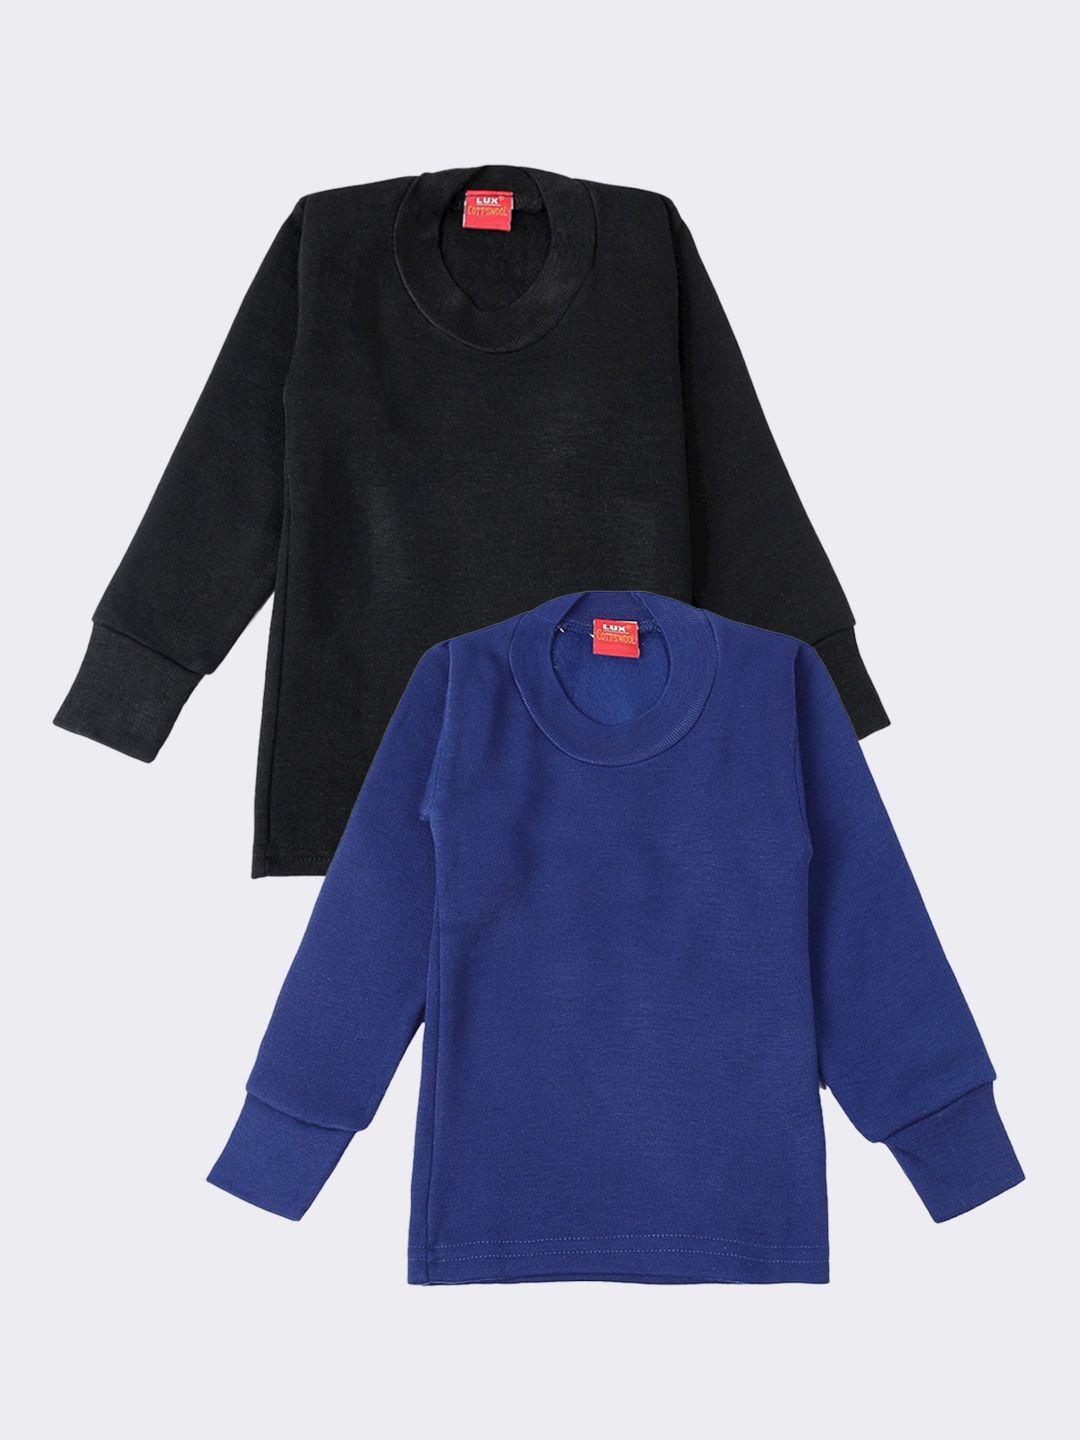 lux cottswool boys pack of 2 blue & black solid cotton thermal tops